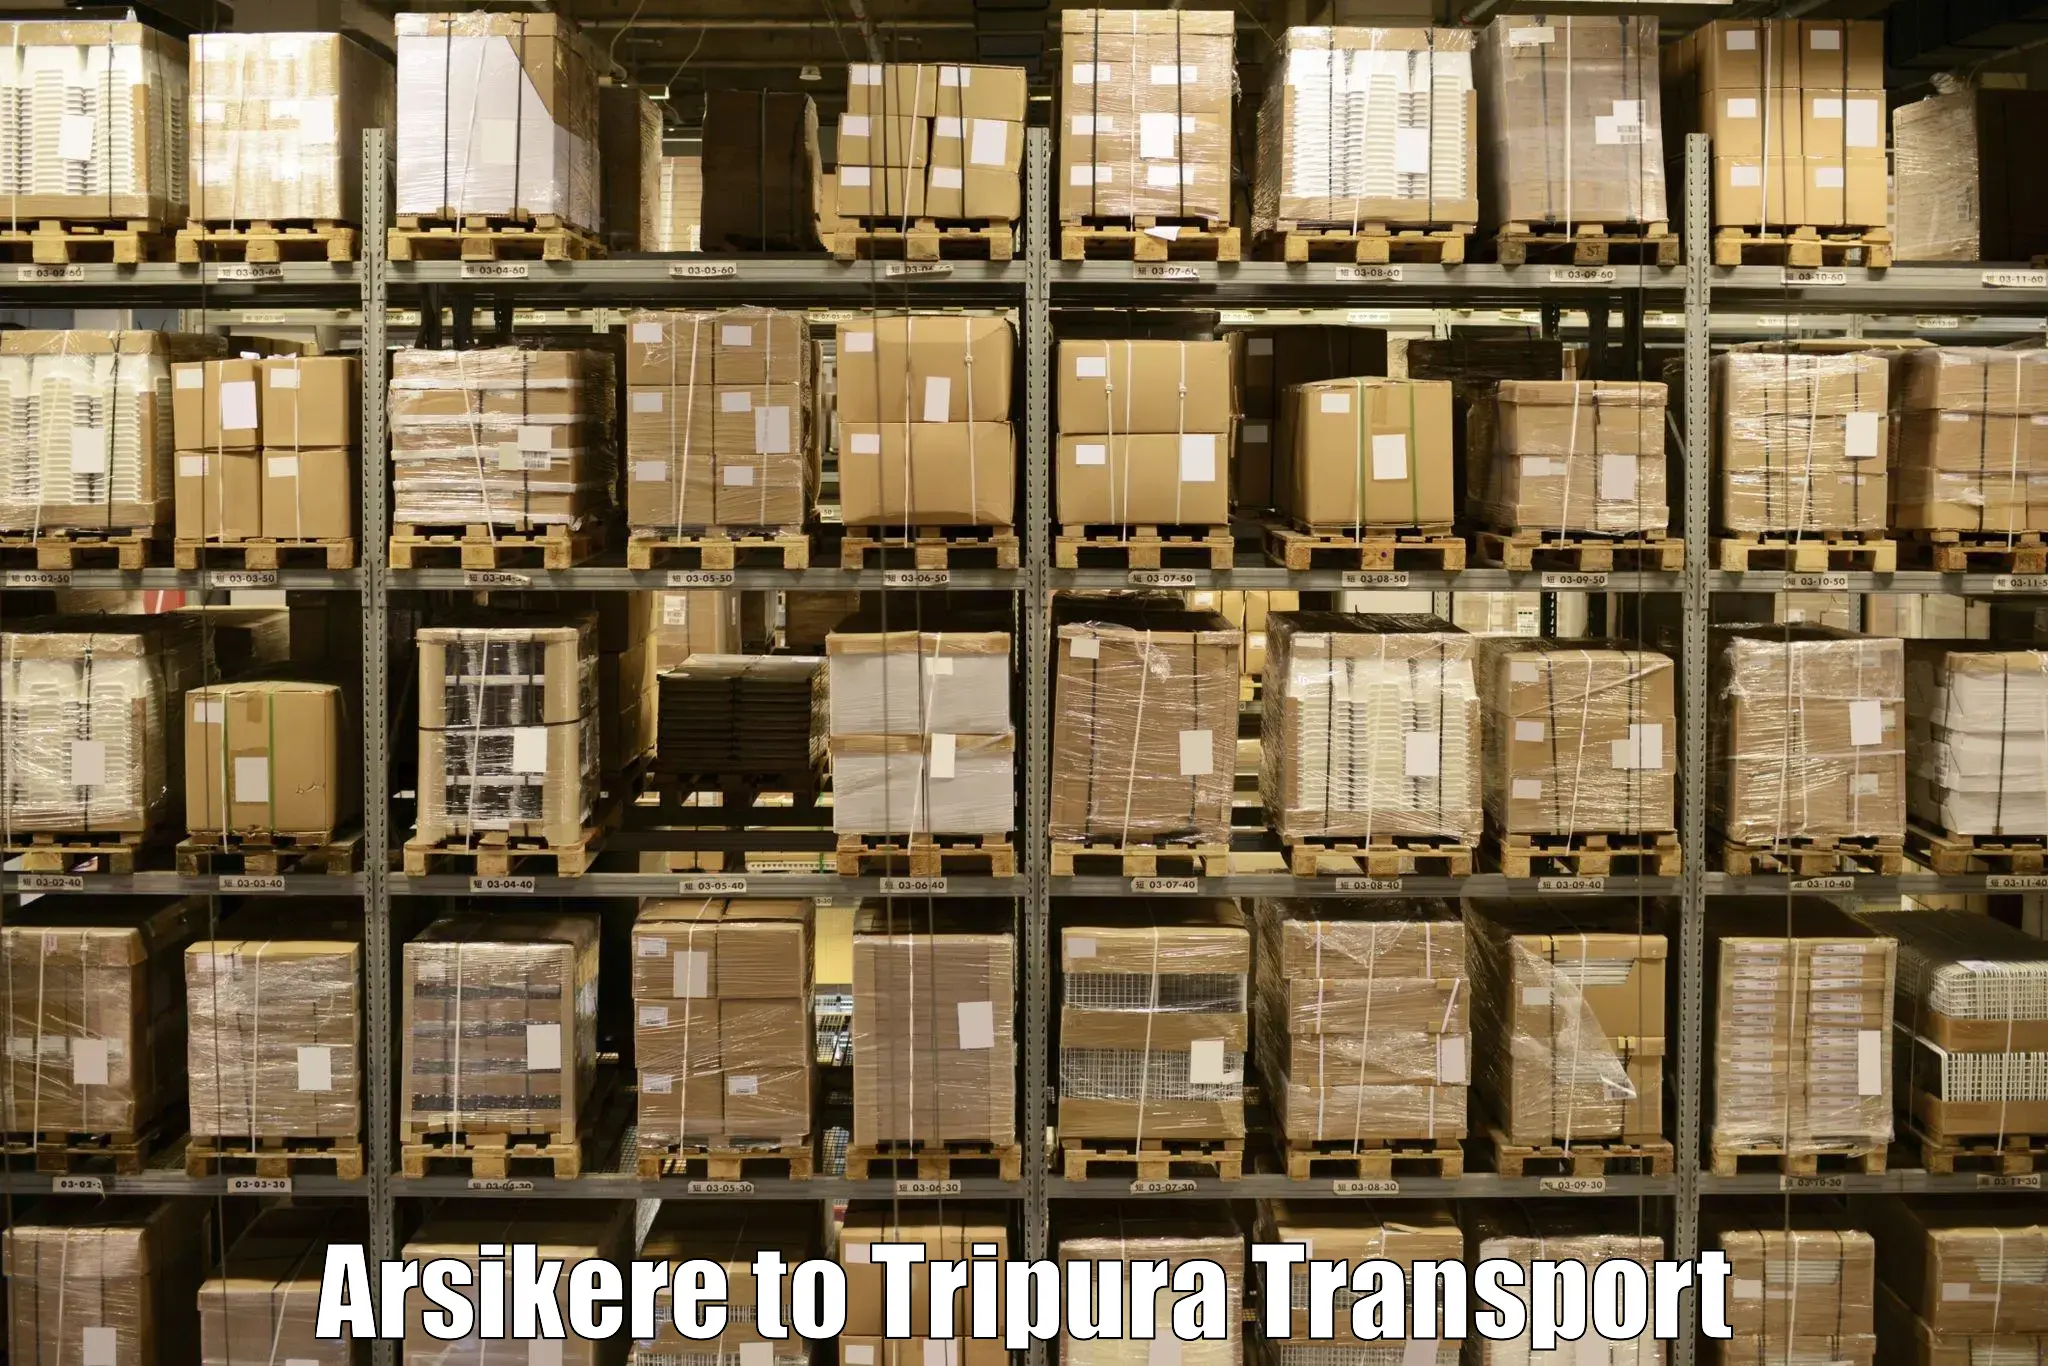 Daily parcel service transport Arsikere to Agartala